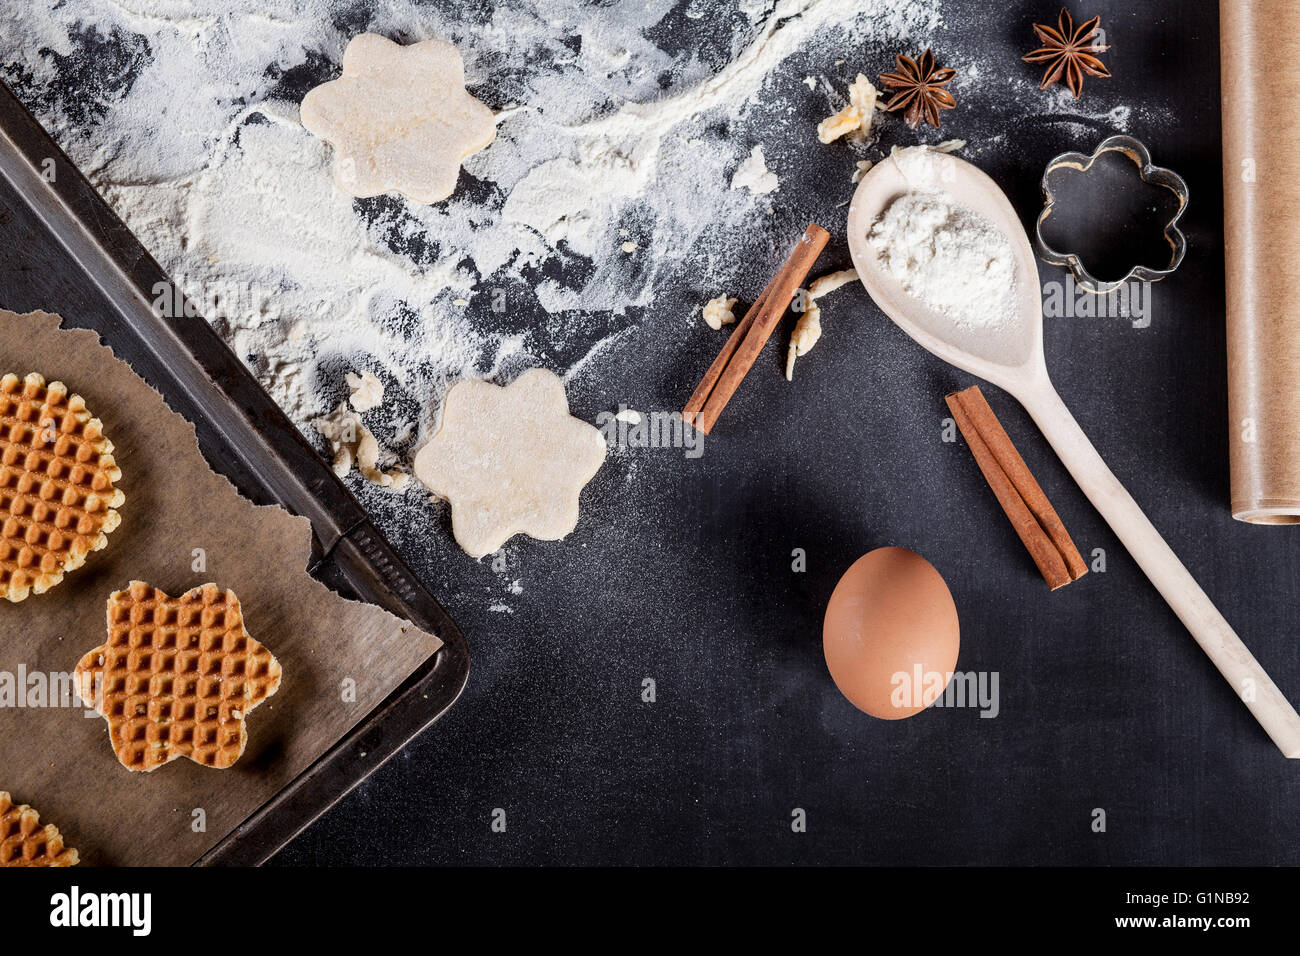 Waffle ingredients like eggs, flour, cinnamon, anise, rolling pin, paper on blackboard from the top Stock Photo